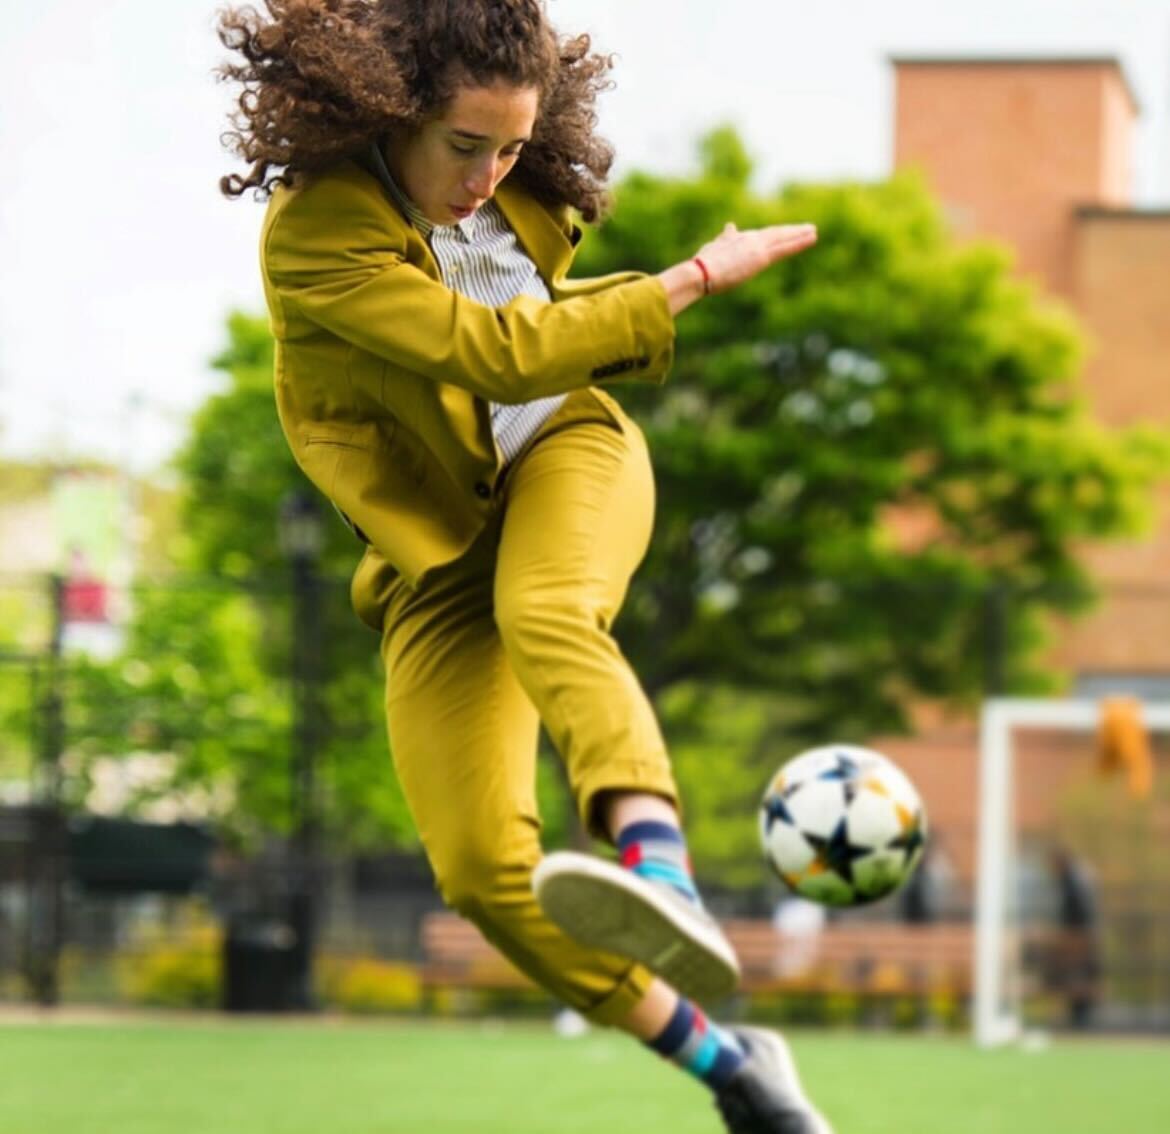 Alumna Lorena Russi, who recently starred in a Women’s World Cup ad, discusses her career in comedy and pro-soccer